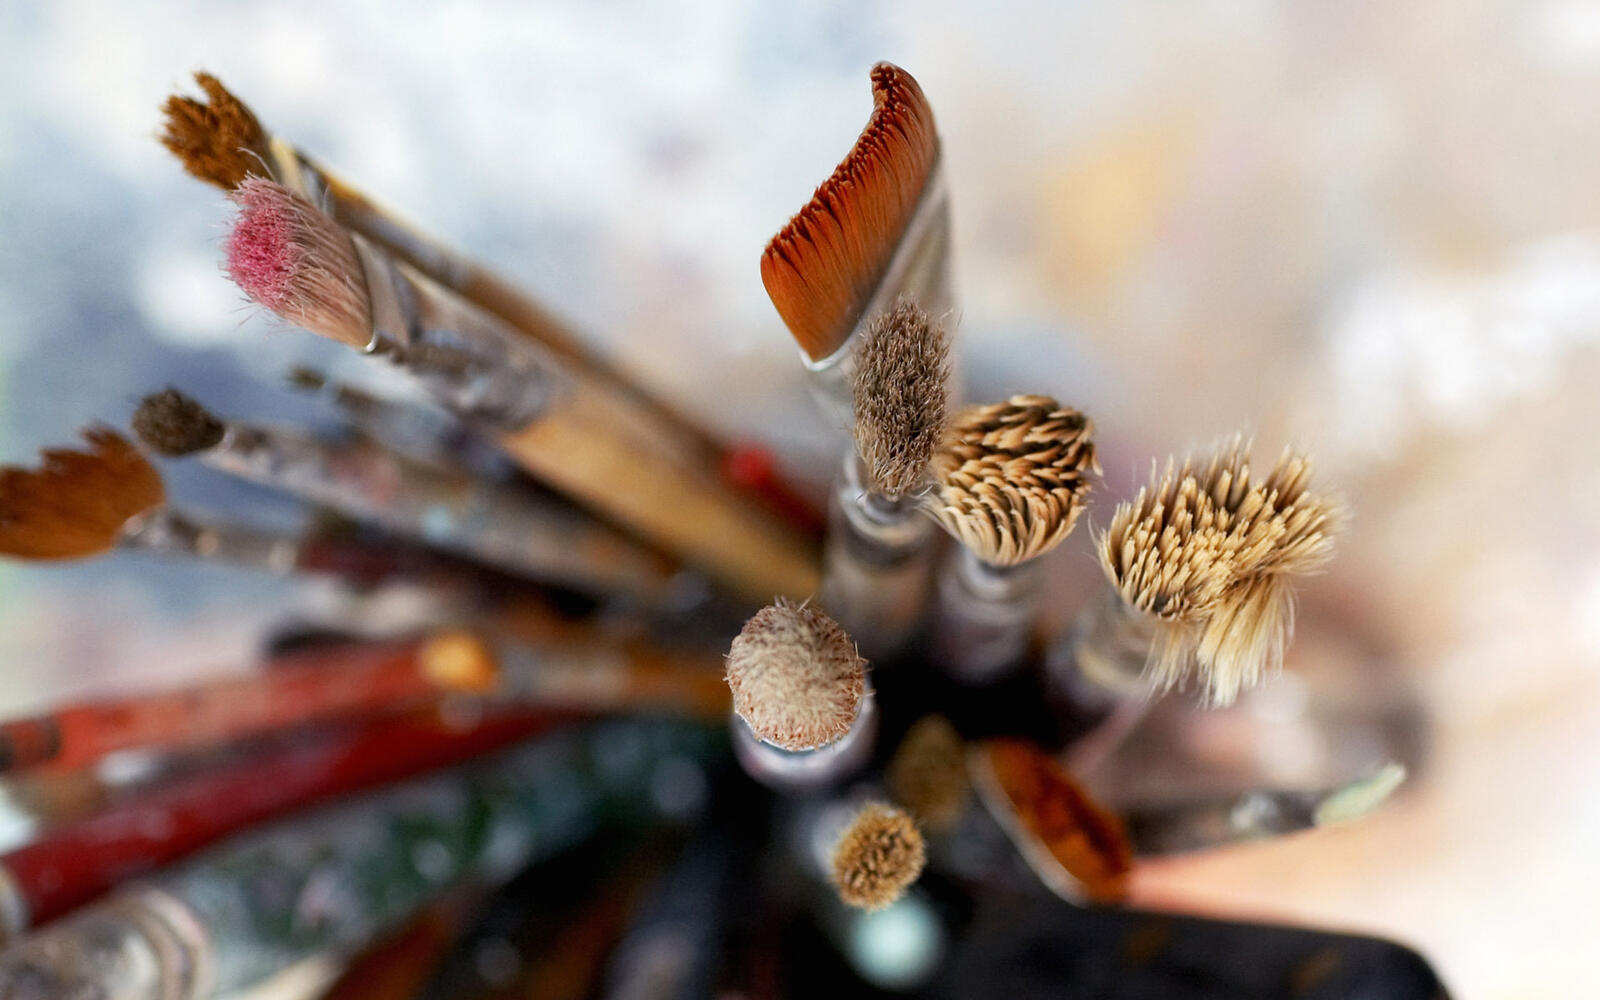 Wallpapers brushes bristles glass on the desktop